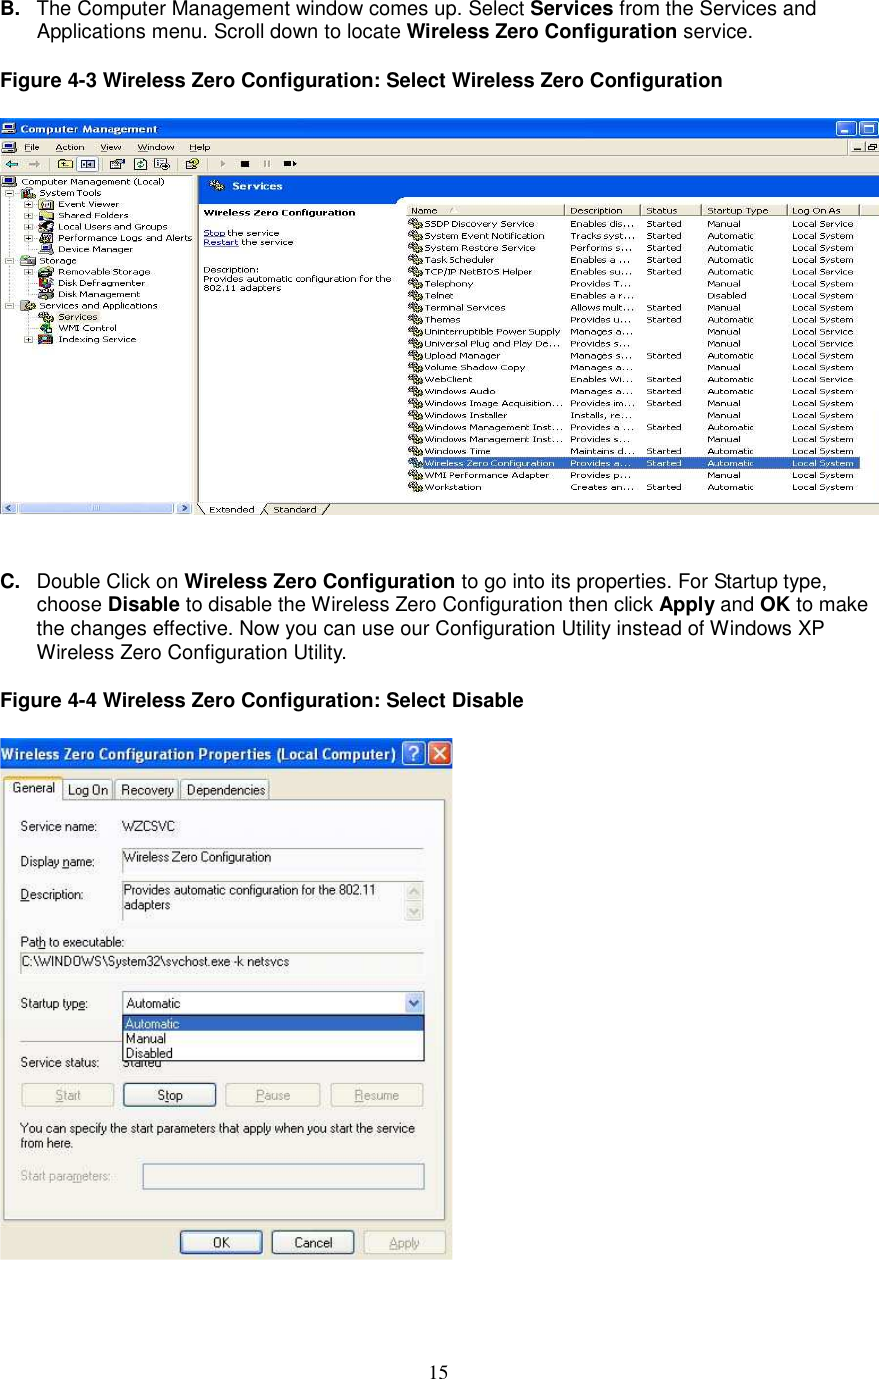  15 B.  The Computer Management window comes up. Select Services from the Services and Applications menu. Scroll down to locate Wireless Zero Configuration service.  Figure 4-3 Wireless Zero Configuration: Select Wireless Zero Configuration    C.  Double Click on Wireless Zero Configuration to go into its properties. For Startup type, choose Disable to disable the Wireless Zero Configuration then click Apply and OK to make the changes effective. Now you can use our Configuration Utility instead of Windows XP Wireless Zero Configuration Utility.  Figure 4-4 Wireless Zero Configuration: Select Disable    